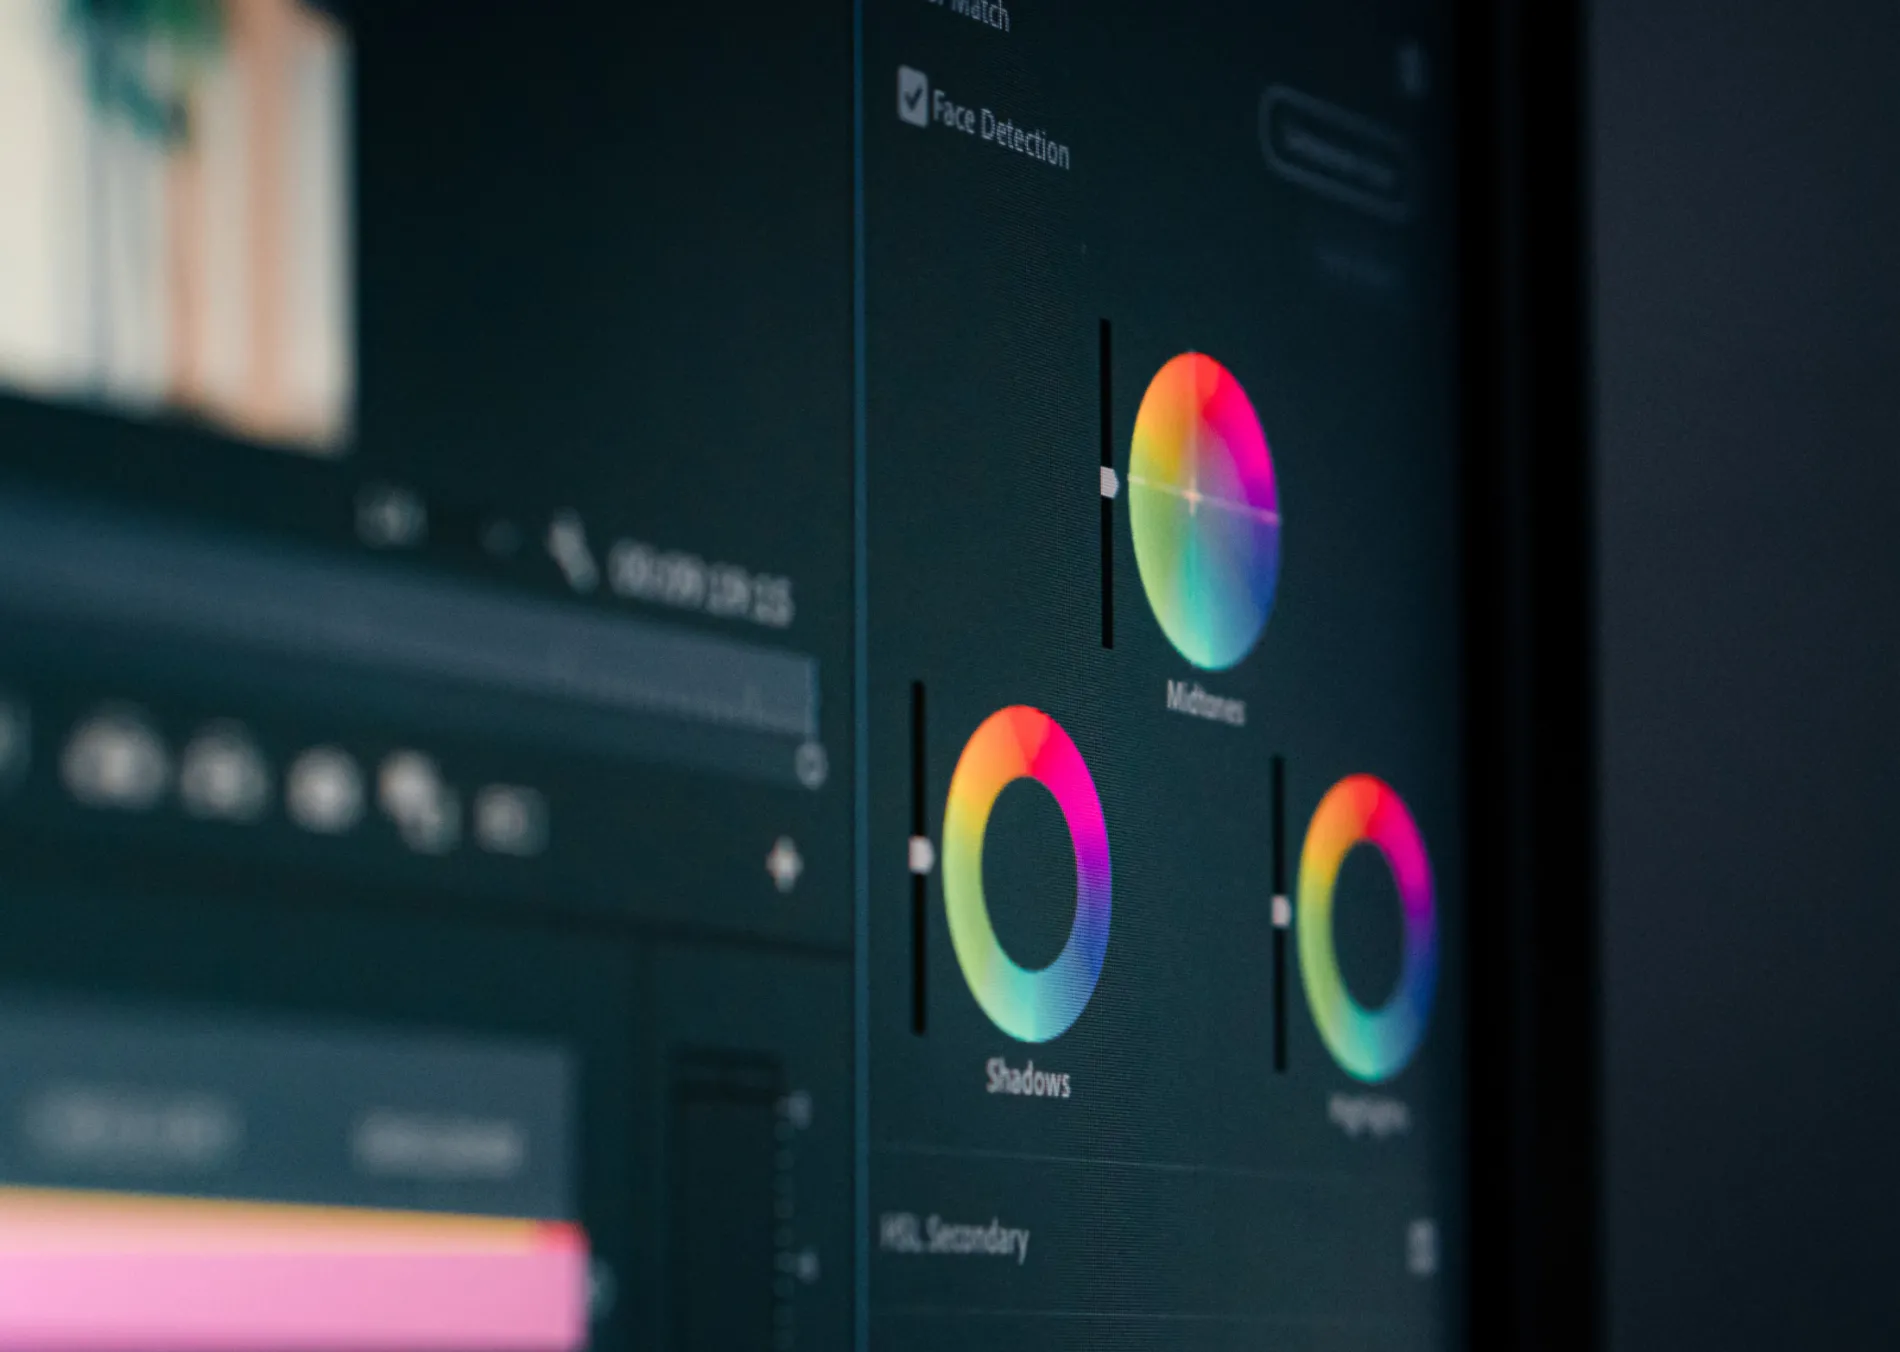 A close up view of video editing software